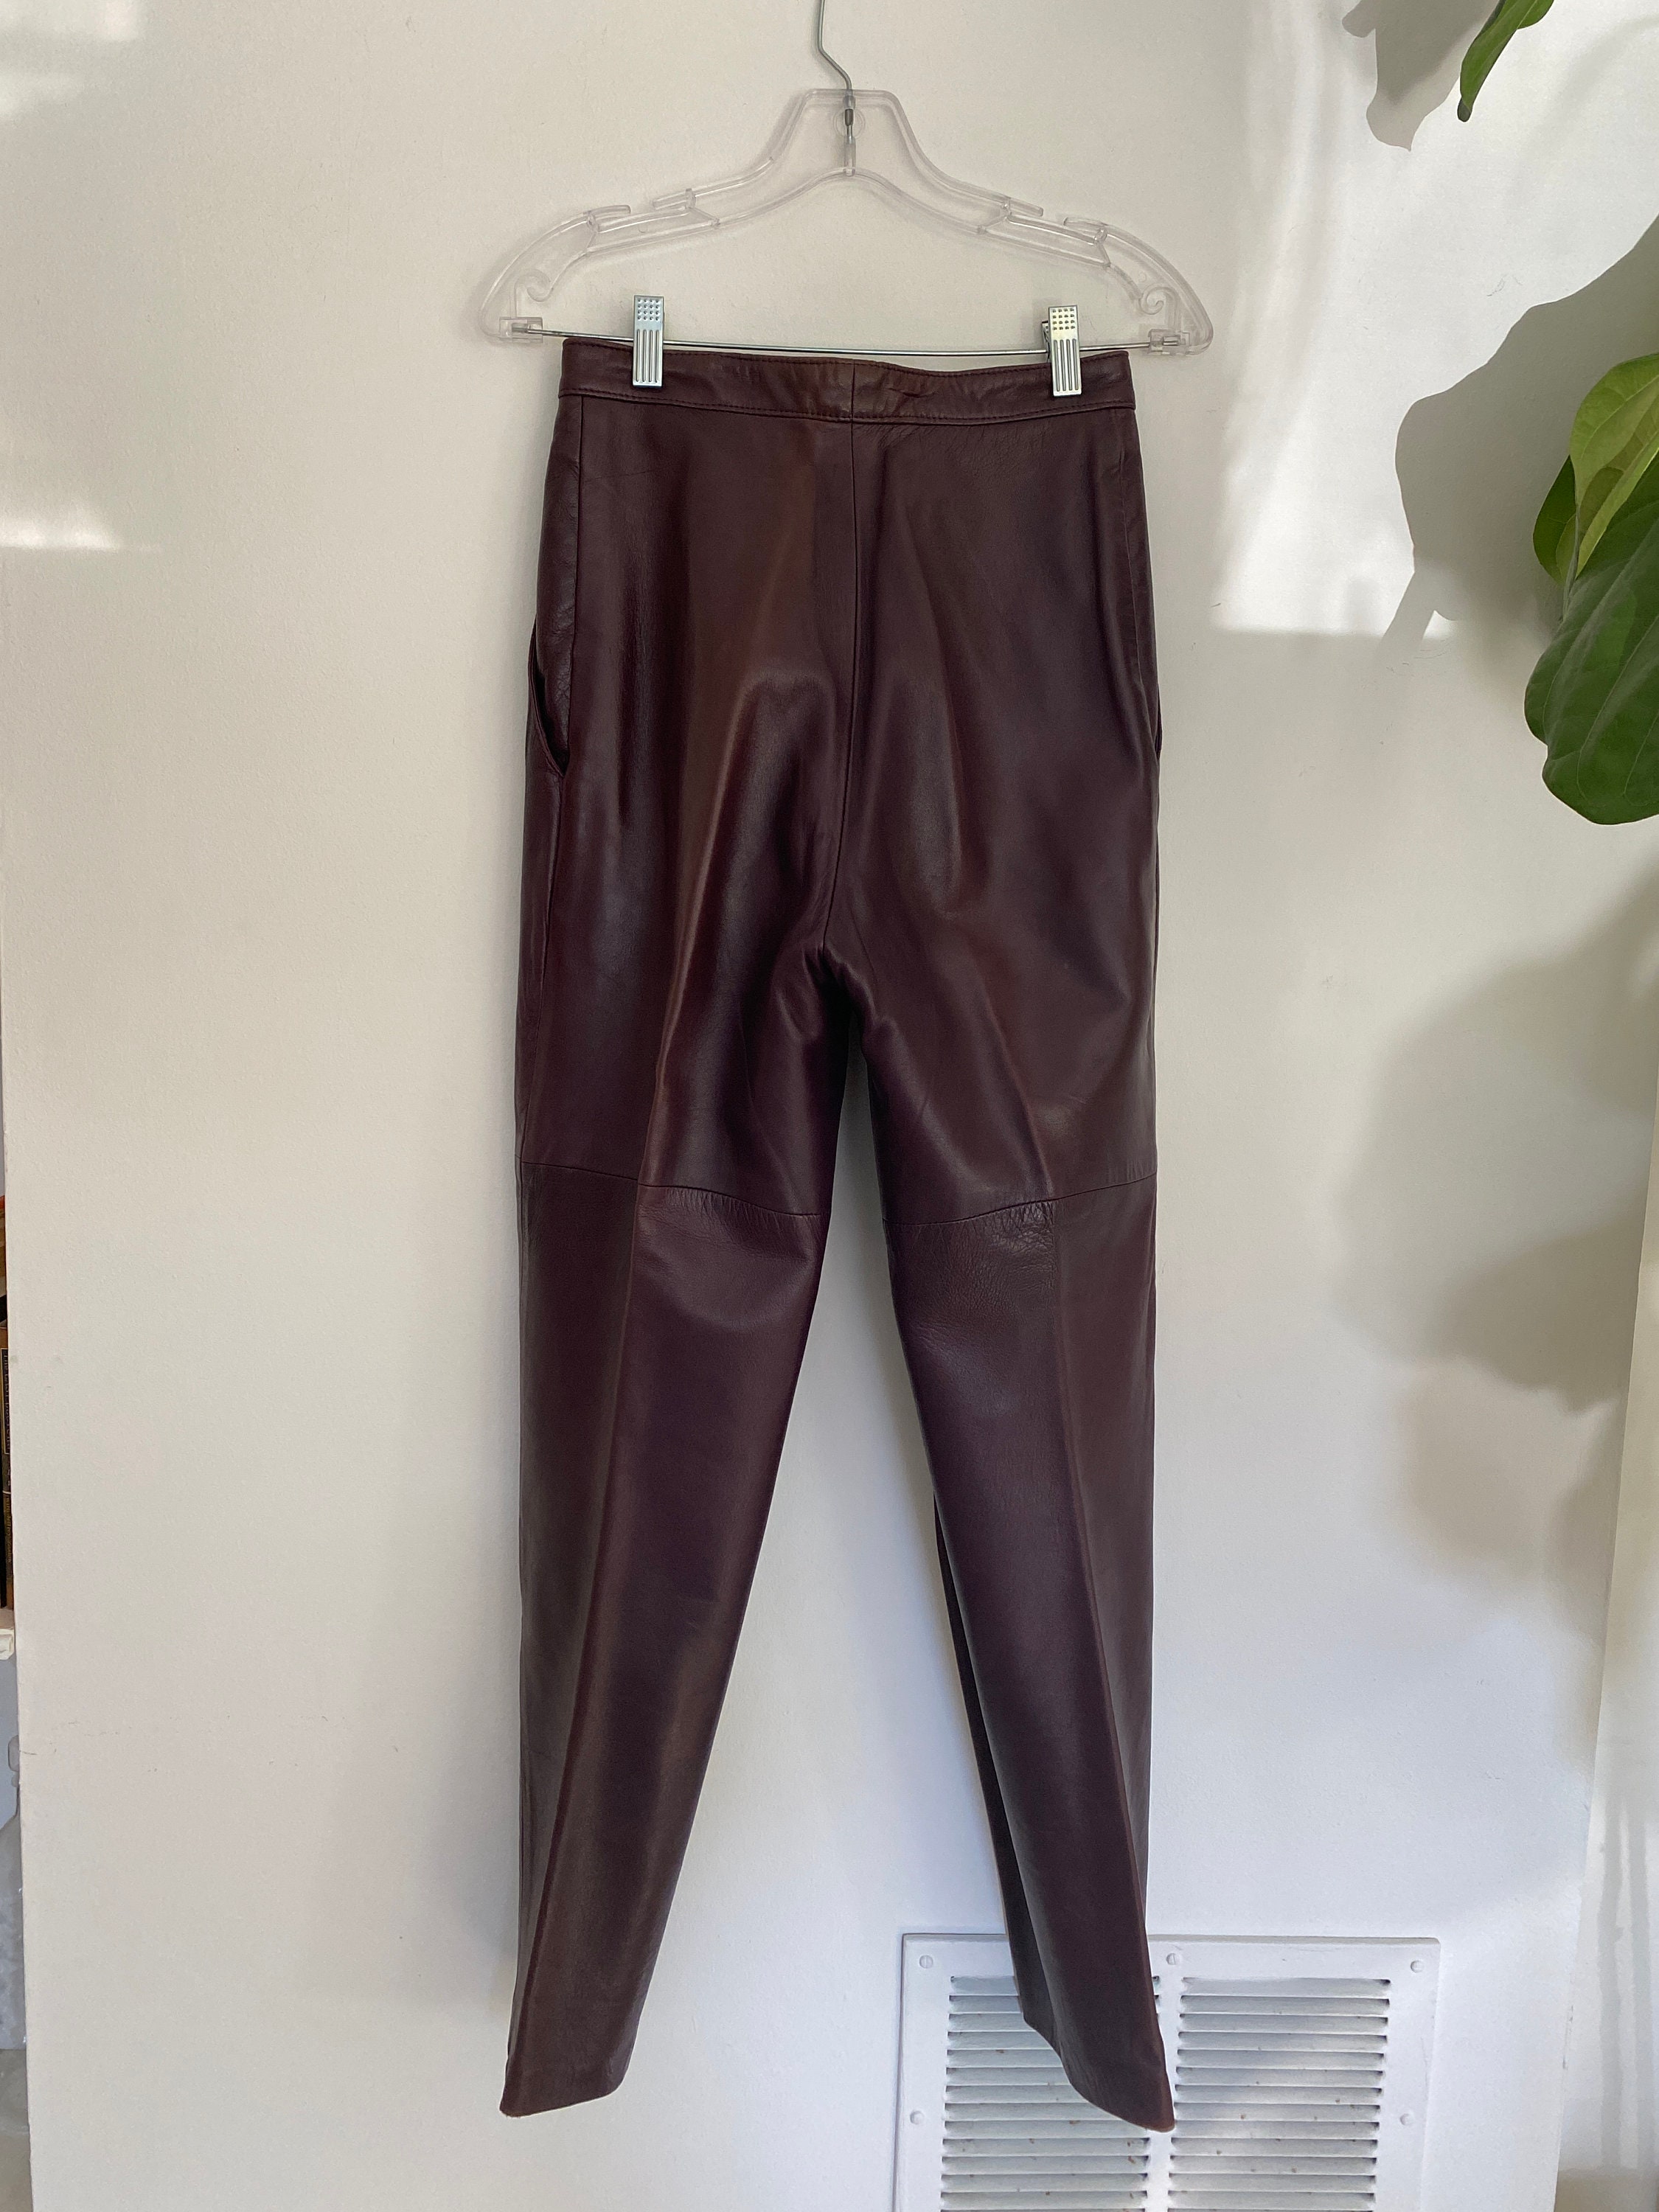 Vintage 80s Purple Leather Pants Size Small High Waisted - Etsy